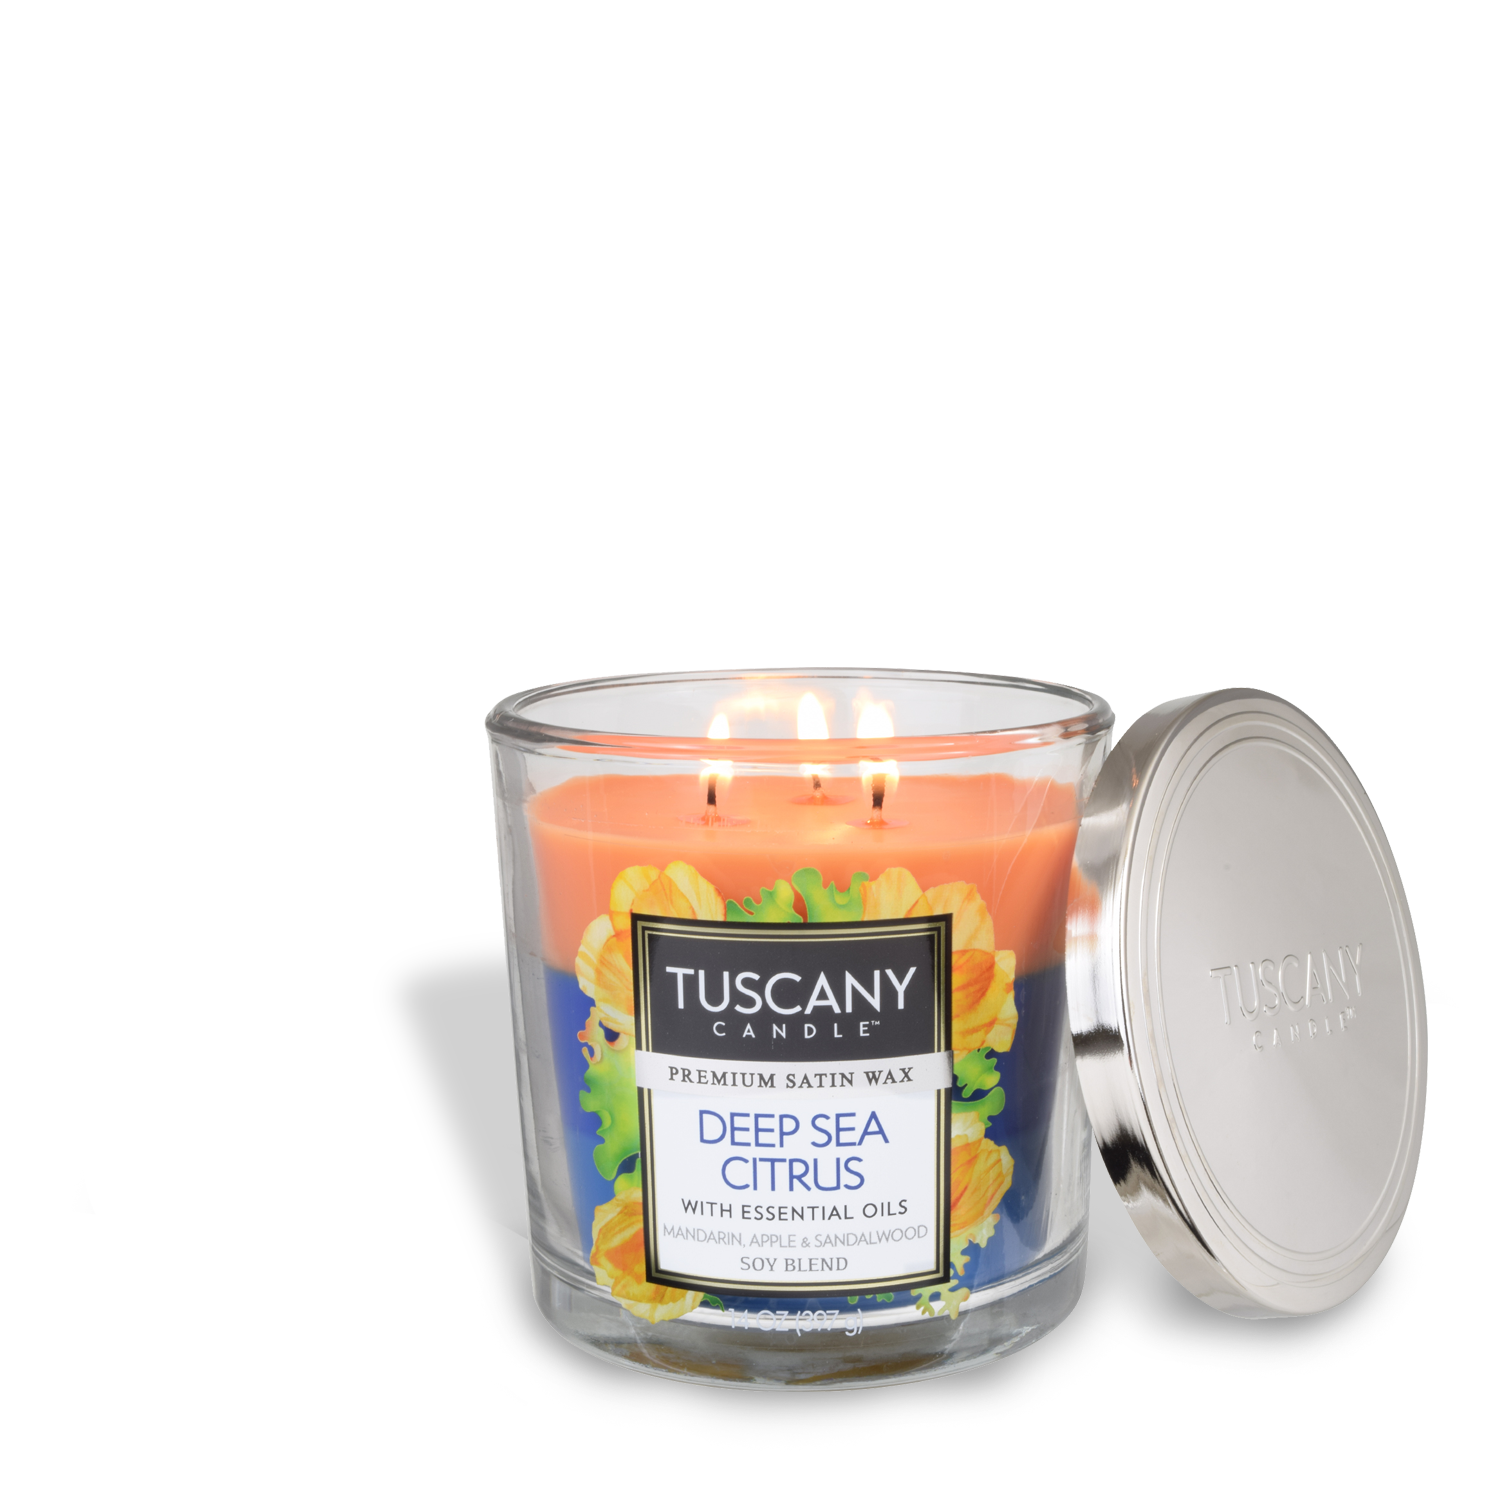 Langley Empire Candle Tuscany 18oz Scented, Sea and Sand 2-Pack, TC-18273x2, 18oz (510g) x 2 [Excluding Glass Jar Weight], Light Blue to Mild Red 3